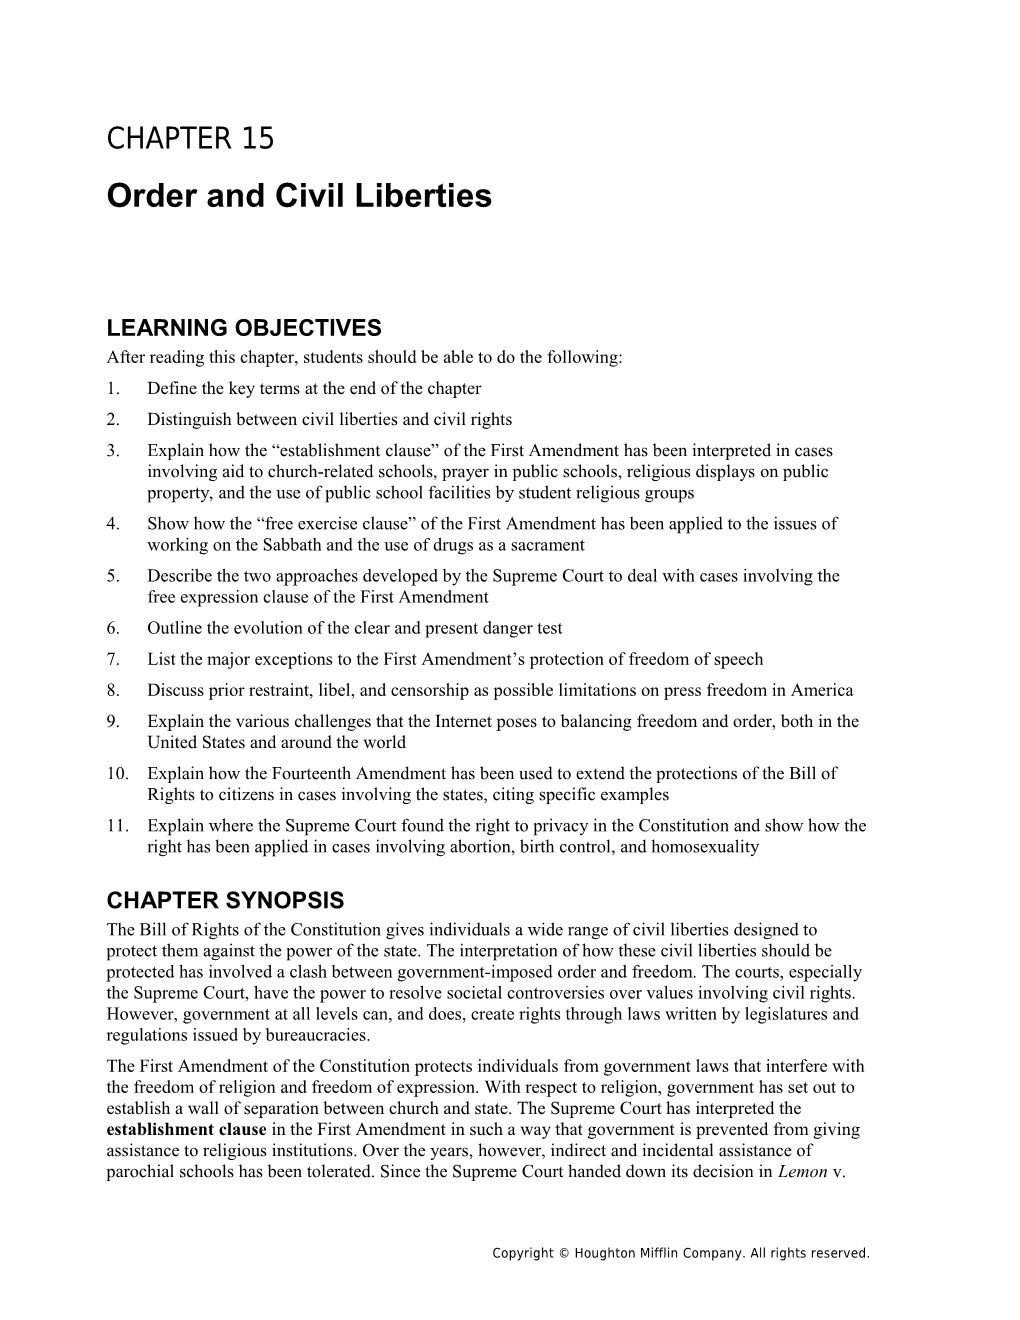 Chapter 15: Order and Civil Liberties 1